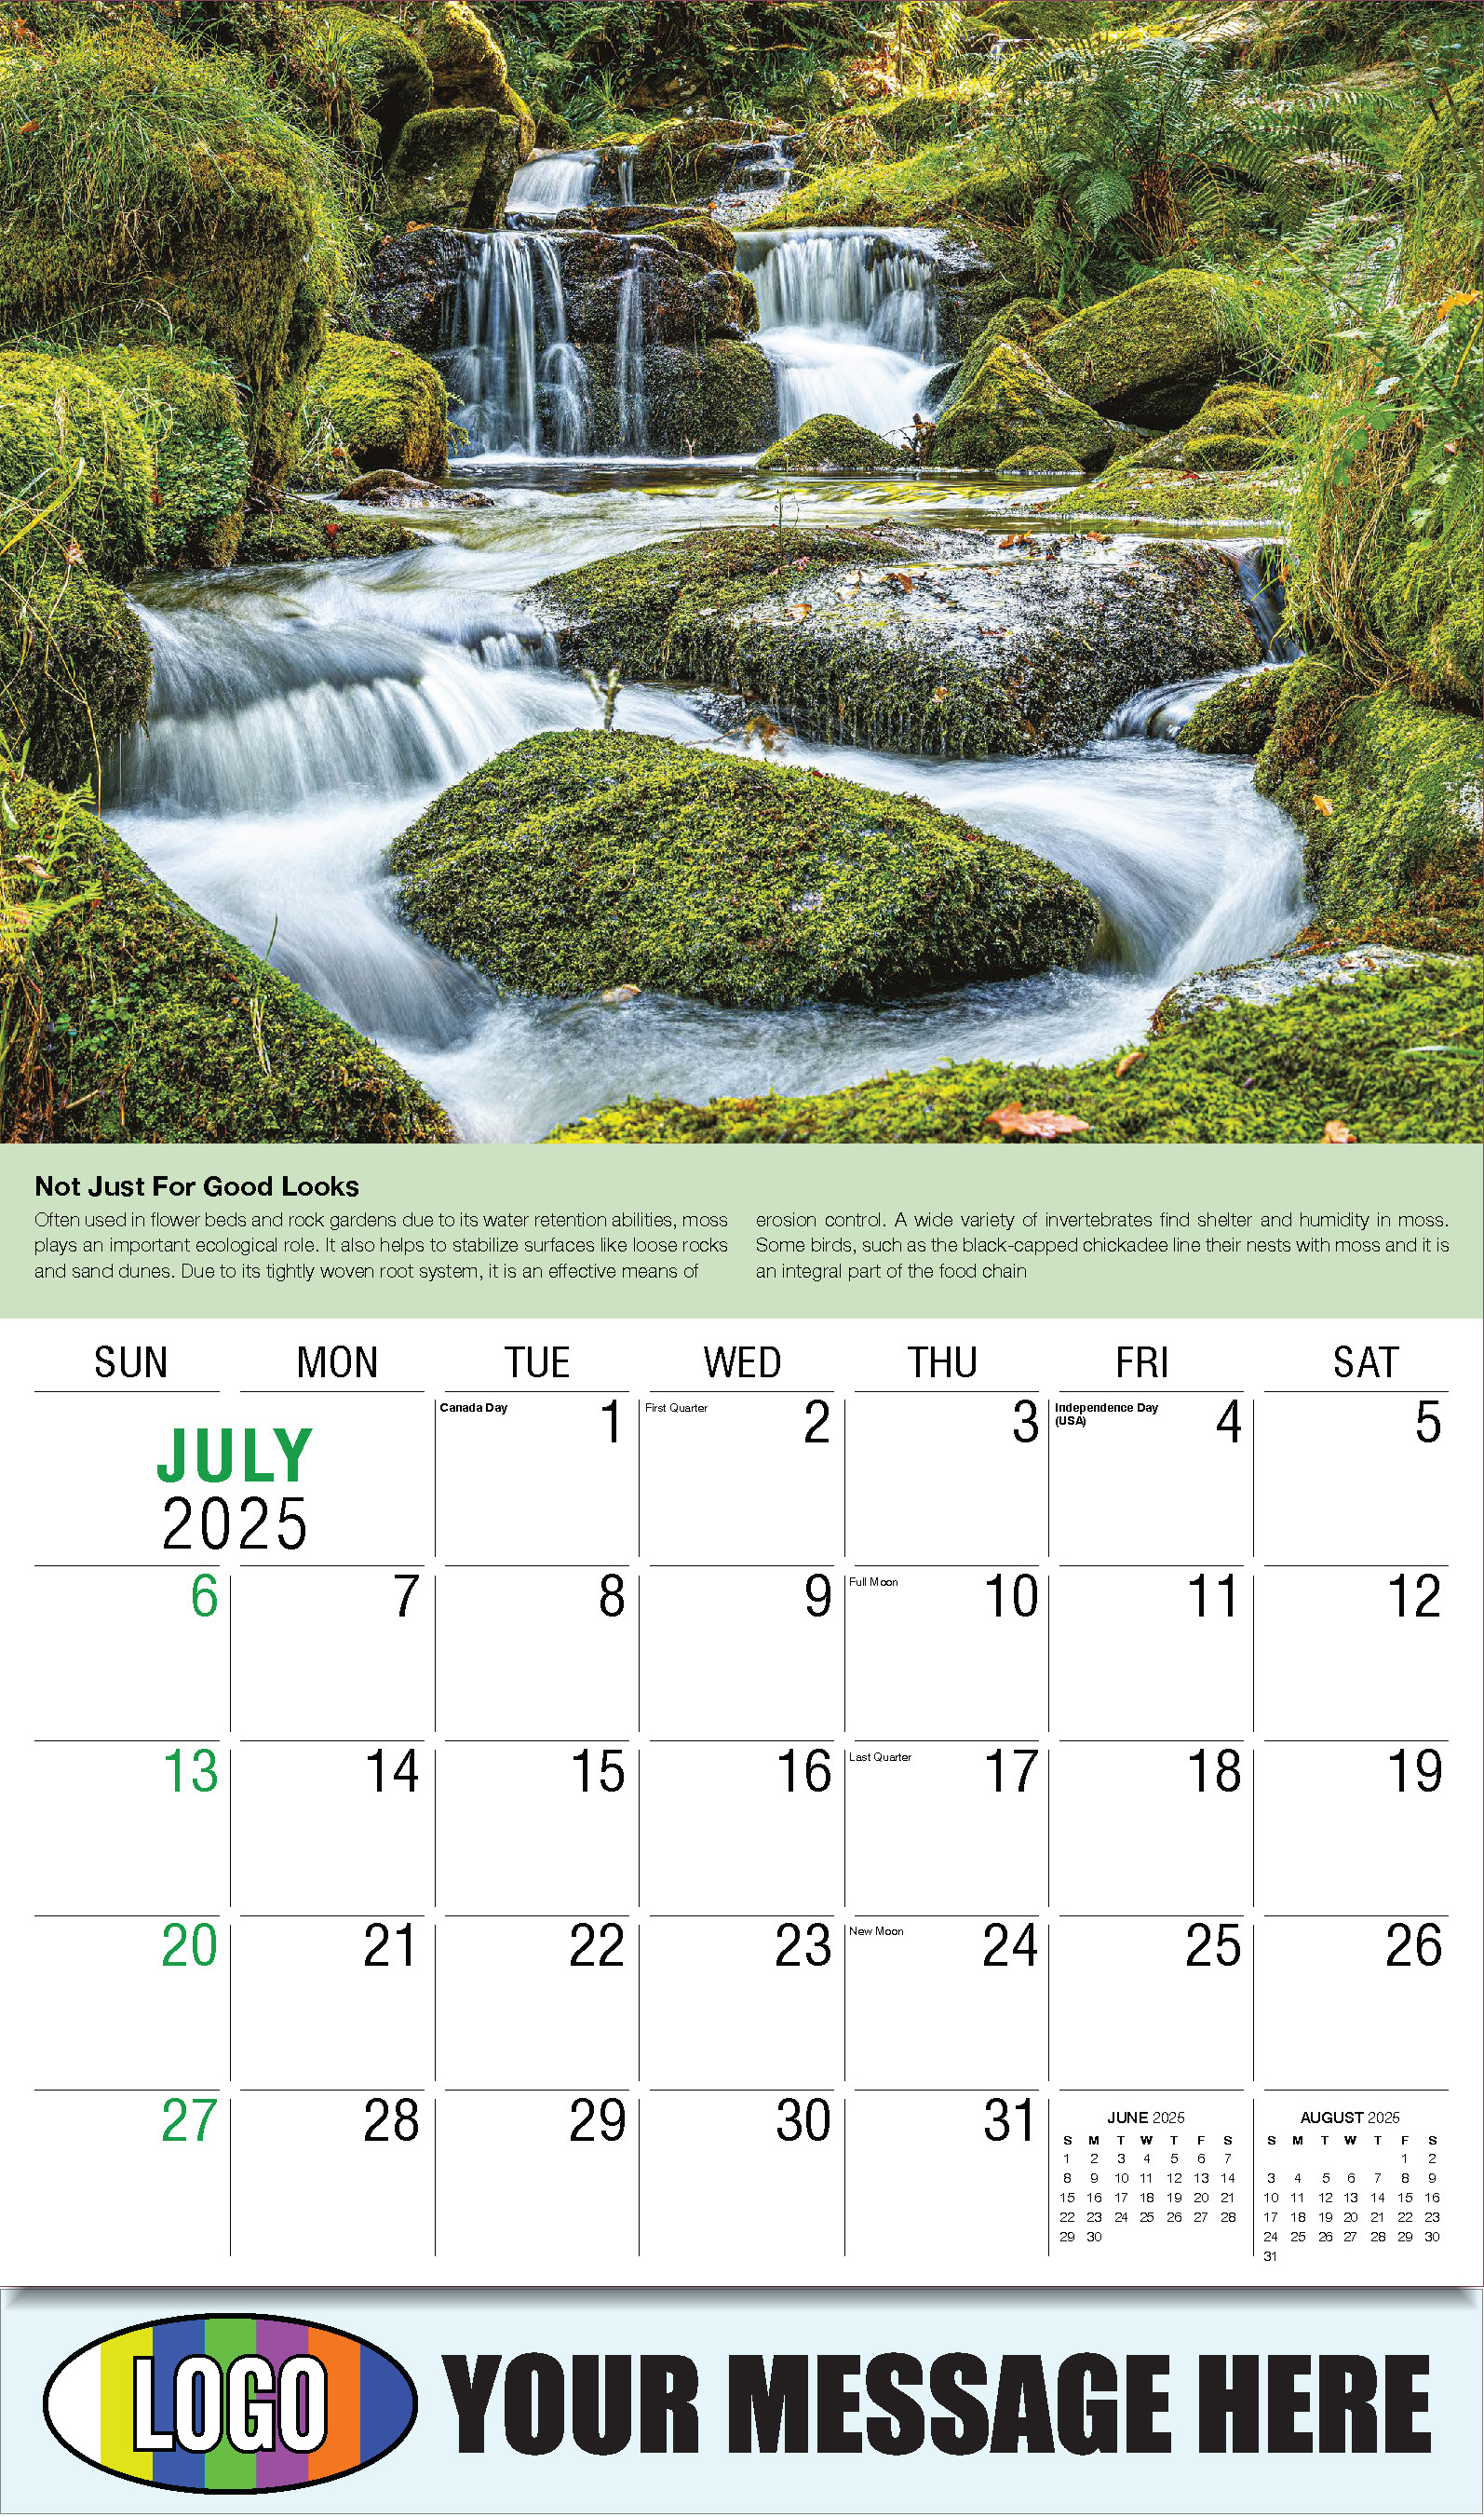 Planet Earth 2025 Business Promotional Wall Calendar - July